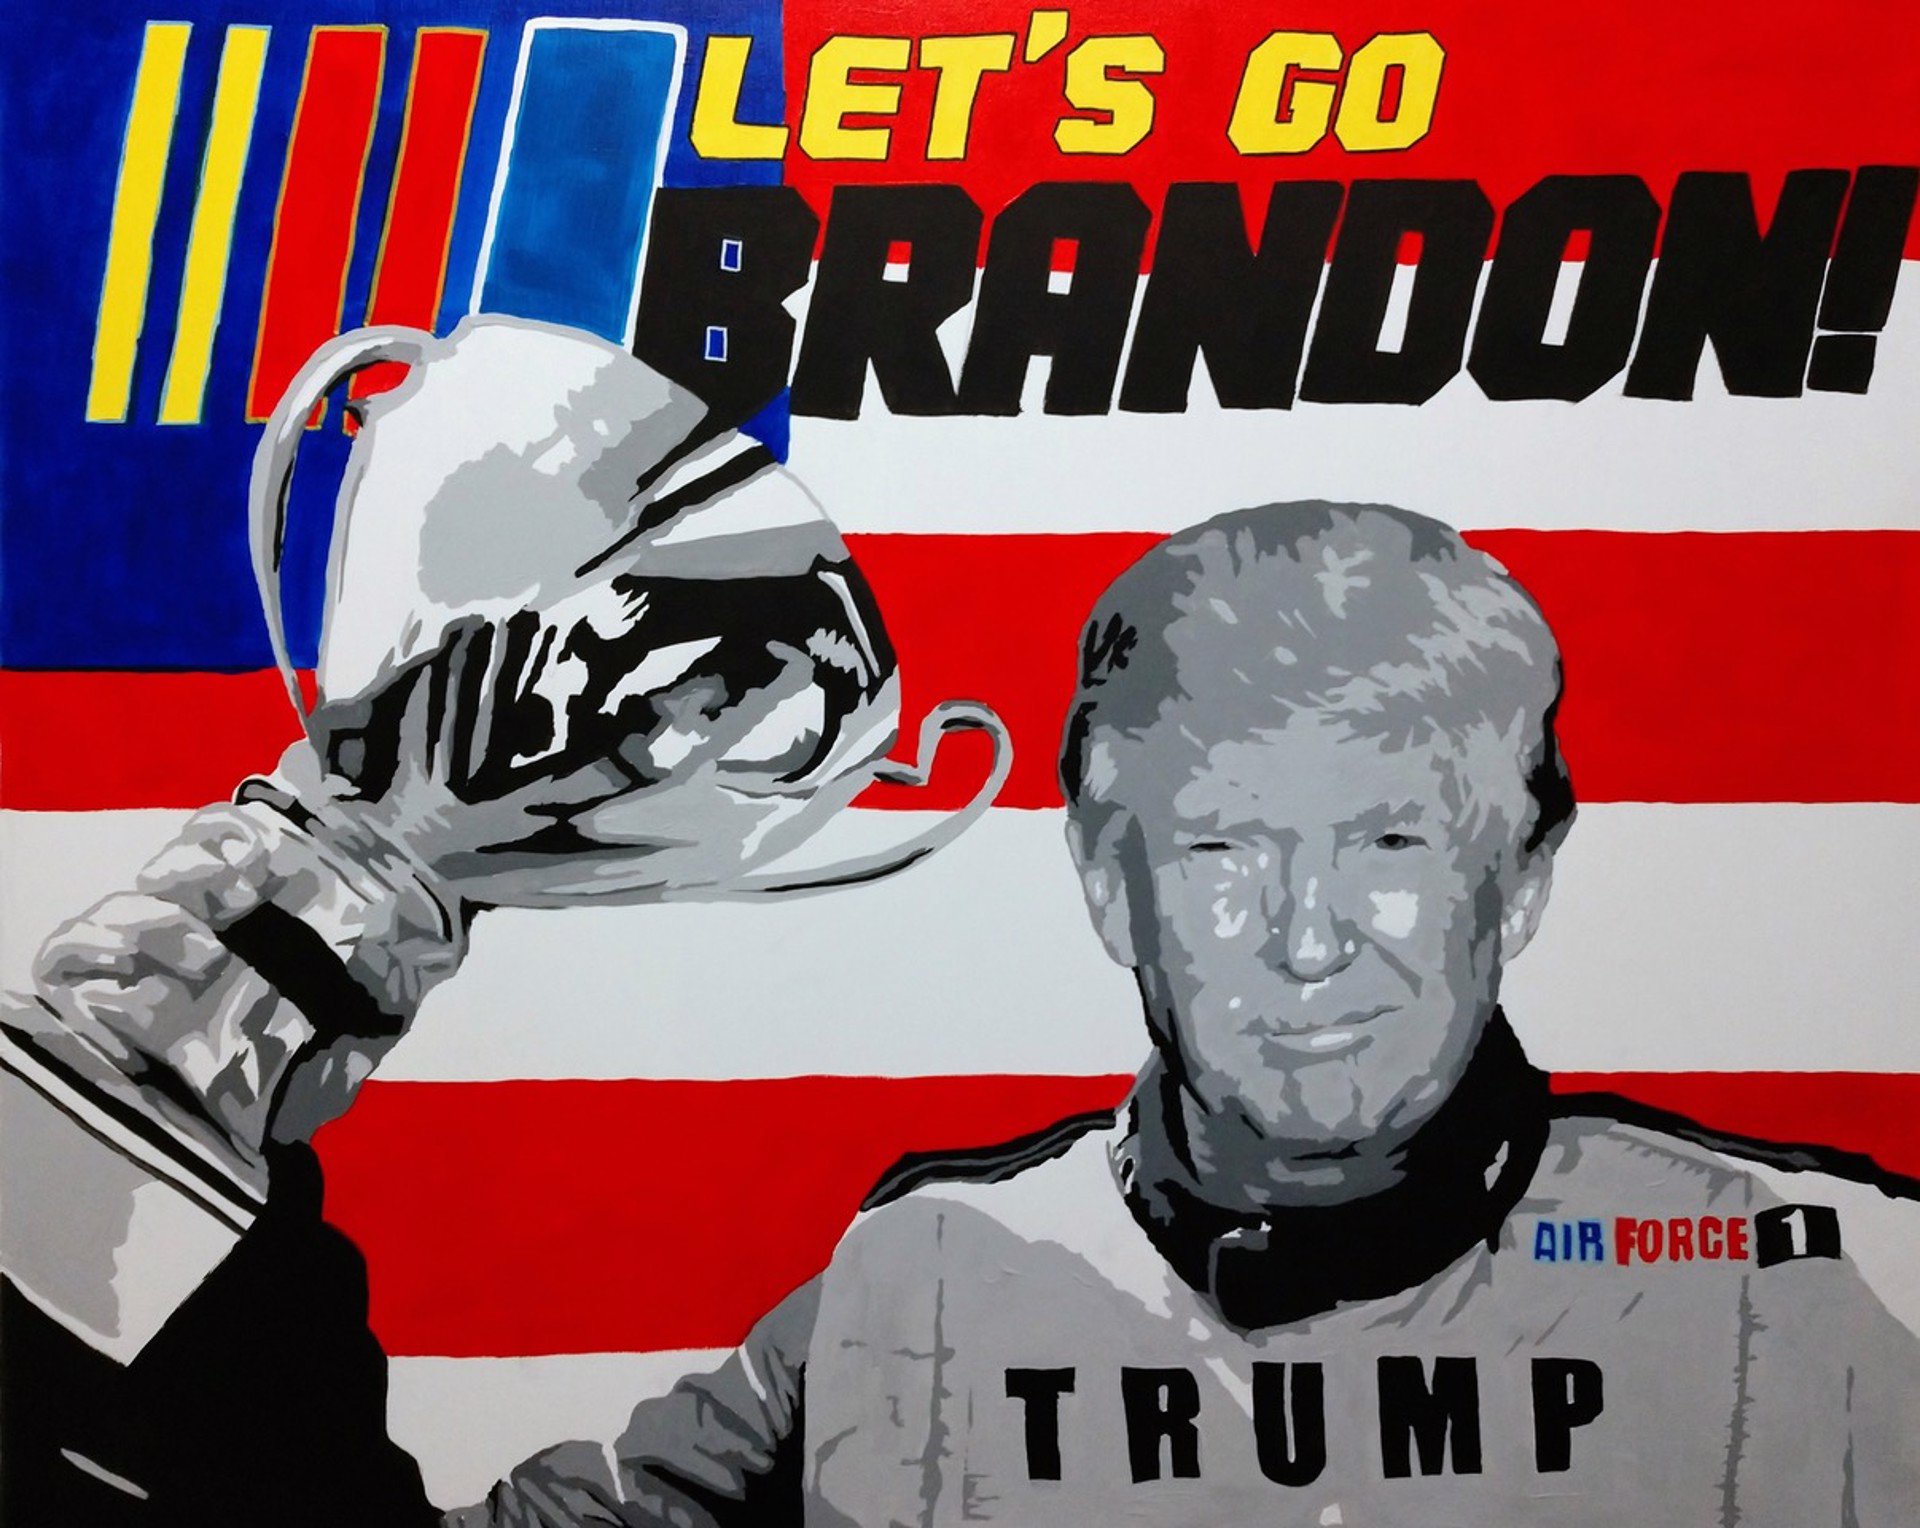 Let’s Go Brandon by Jack Andriano